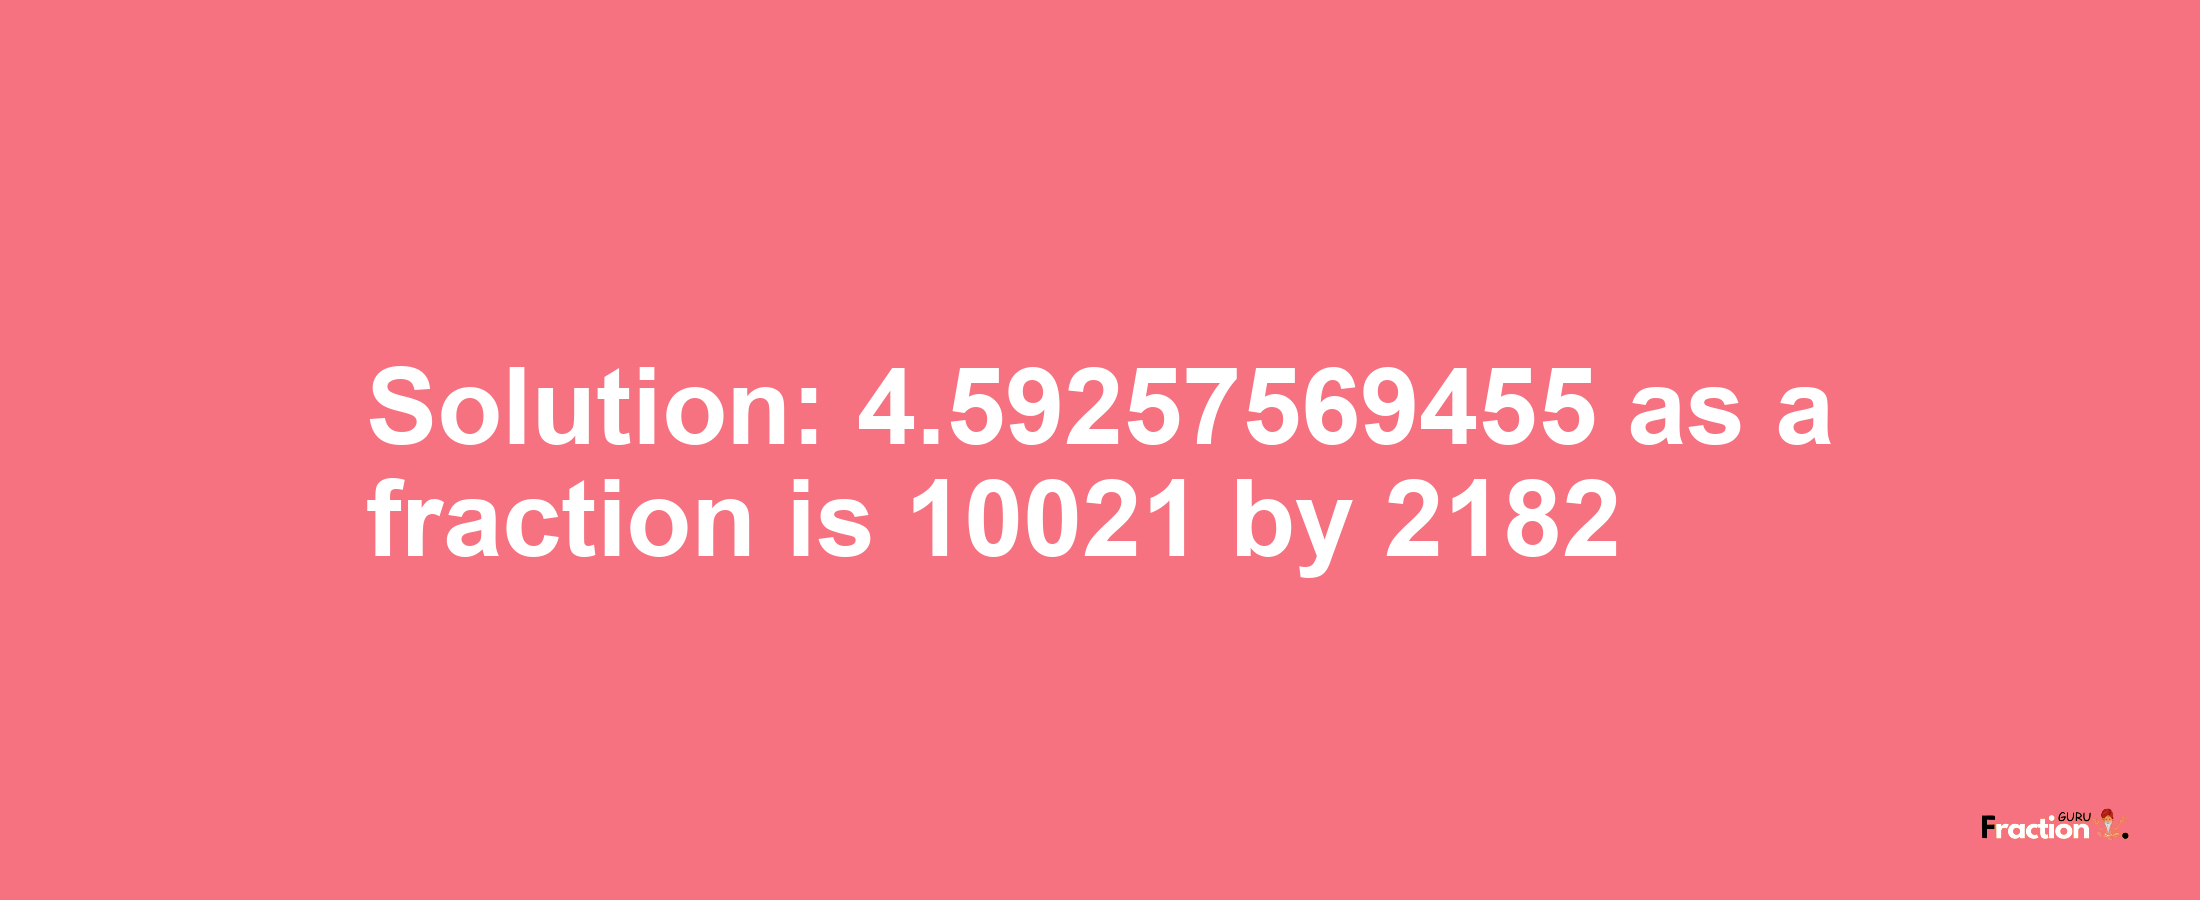 Solution:4.59257569455 as a fraction is 10021/2182